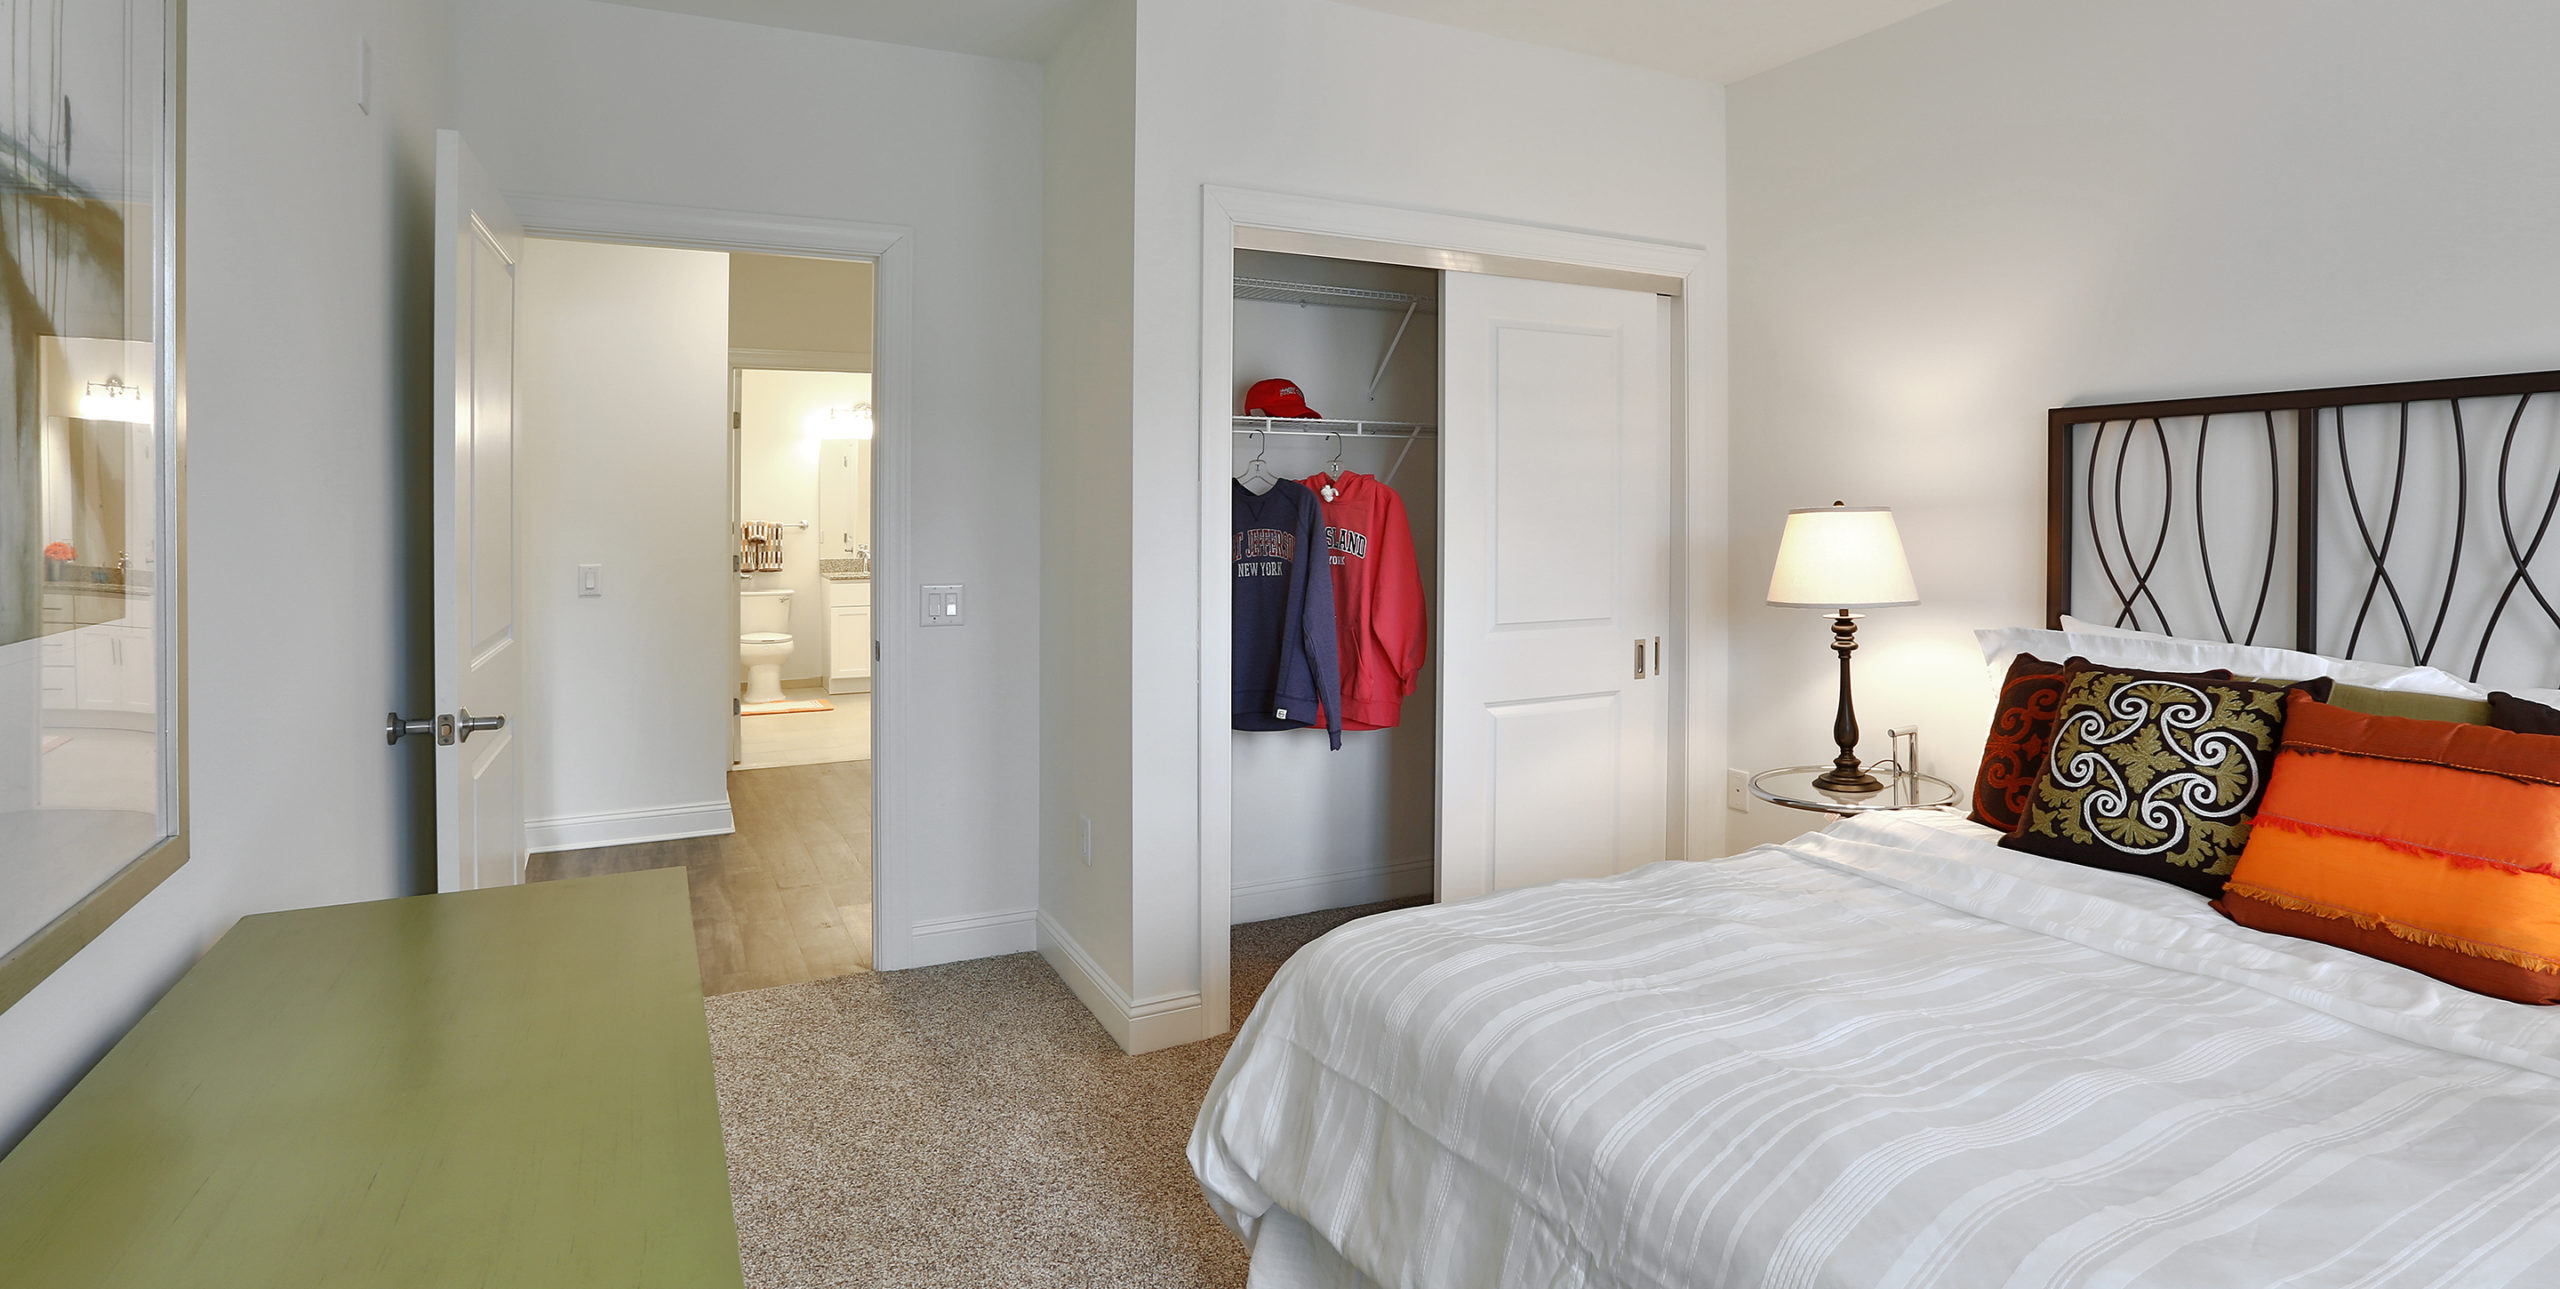 queen-sized bed, closet, and armoire inside a bedroom of an apartment at The Shipyard at Port Jeff Harbor